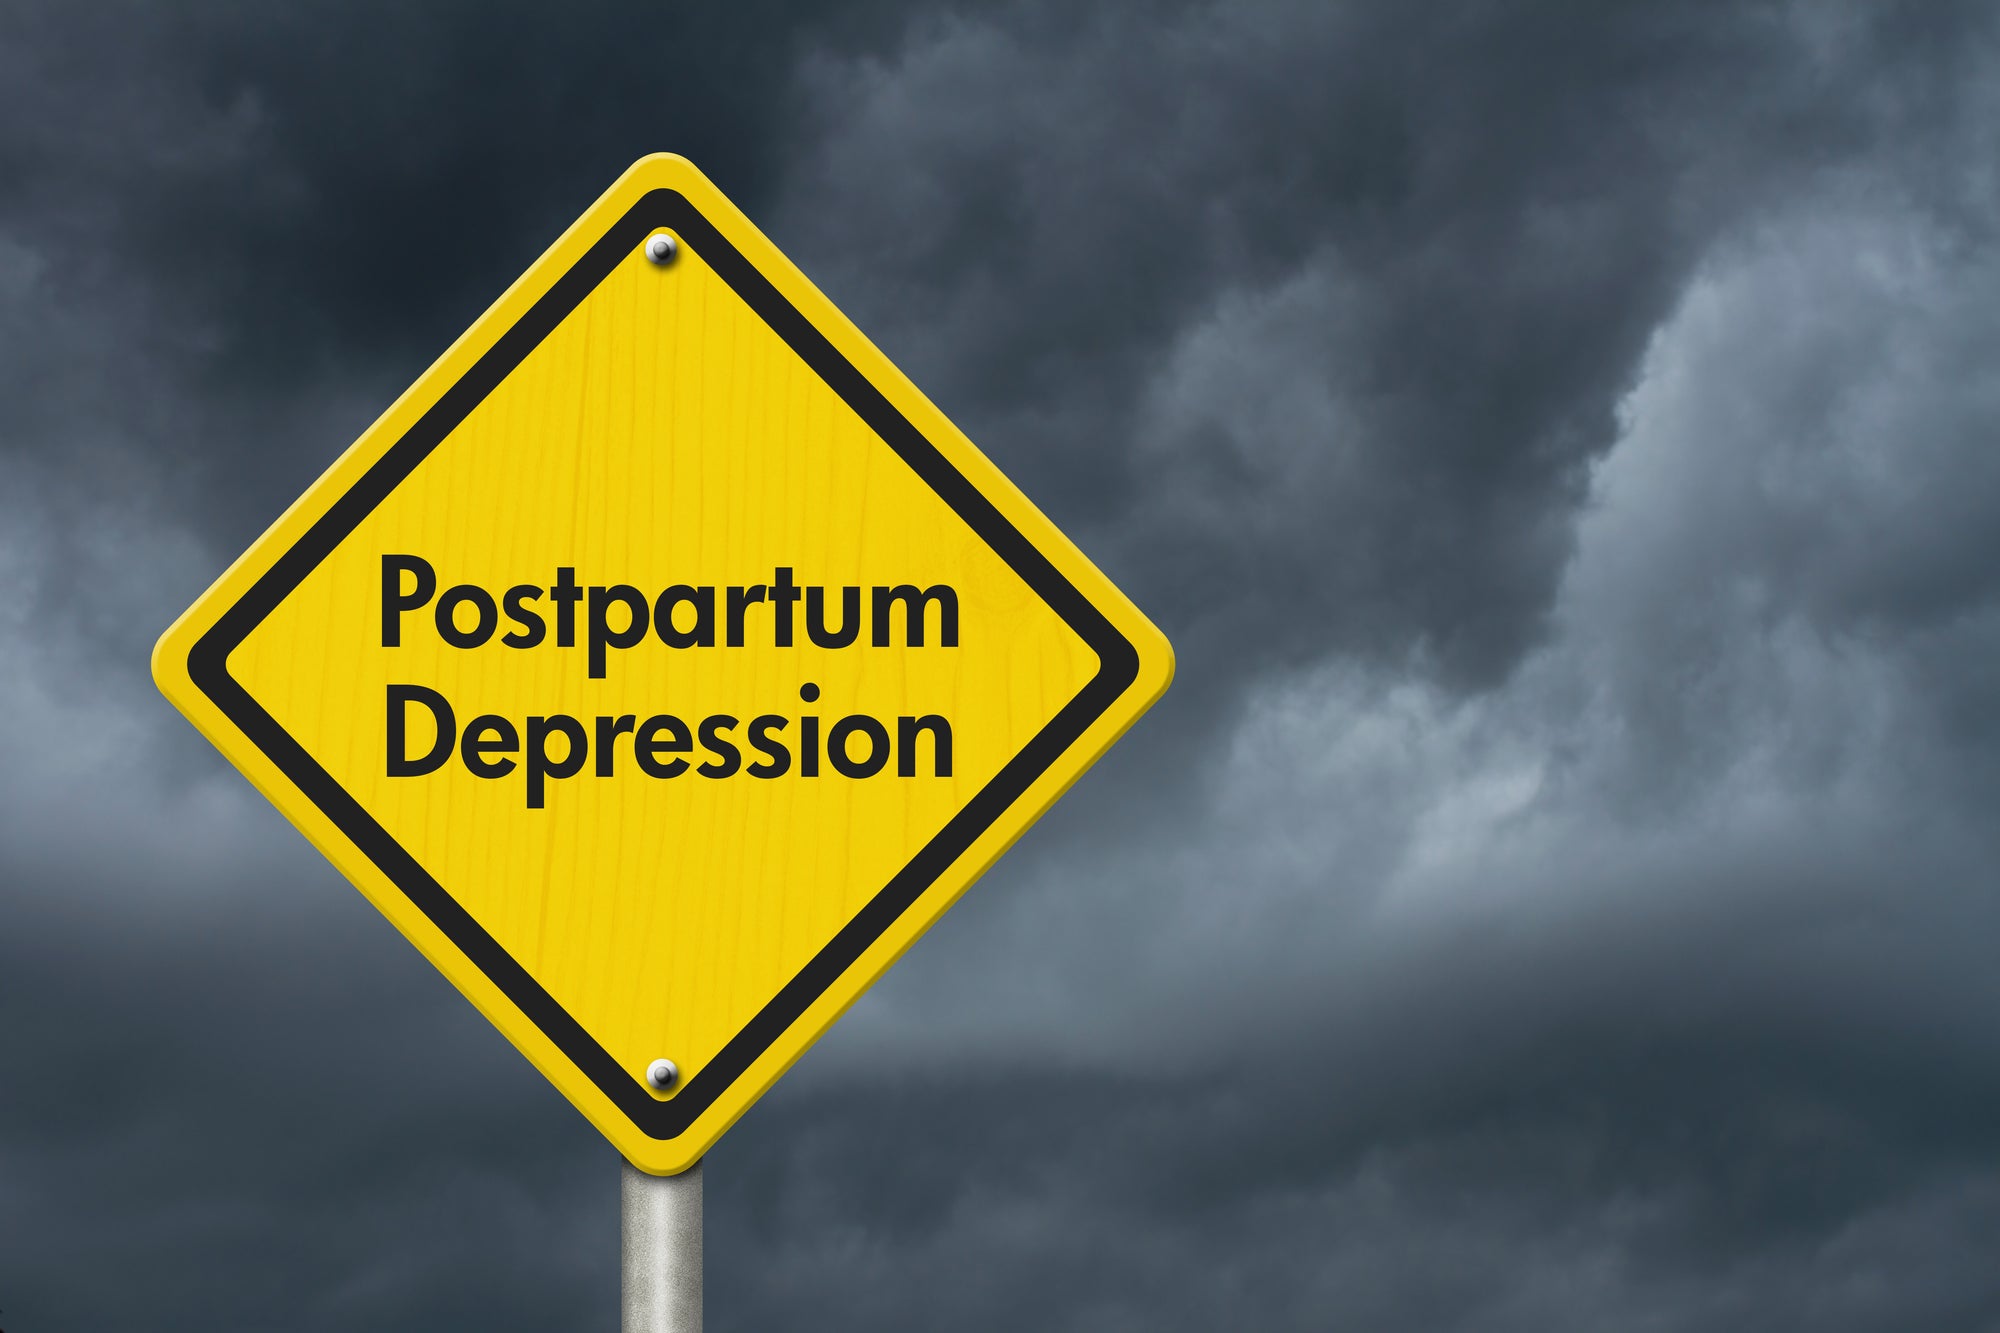 Women in Low-Resource Countries Particularly Vulnerable to Postpartum Depression